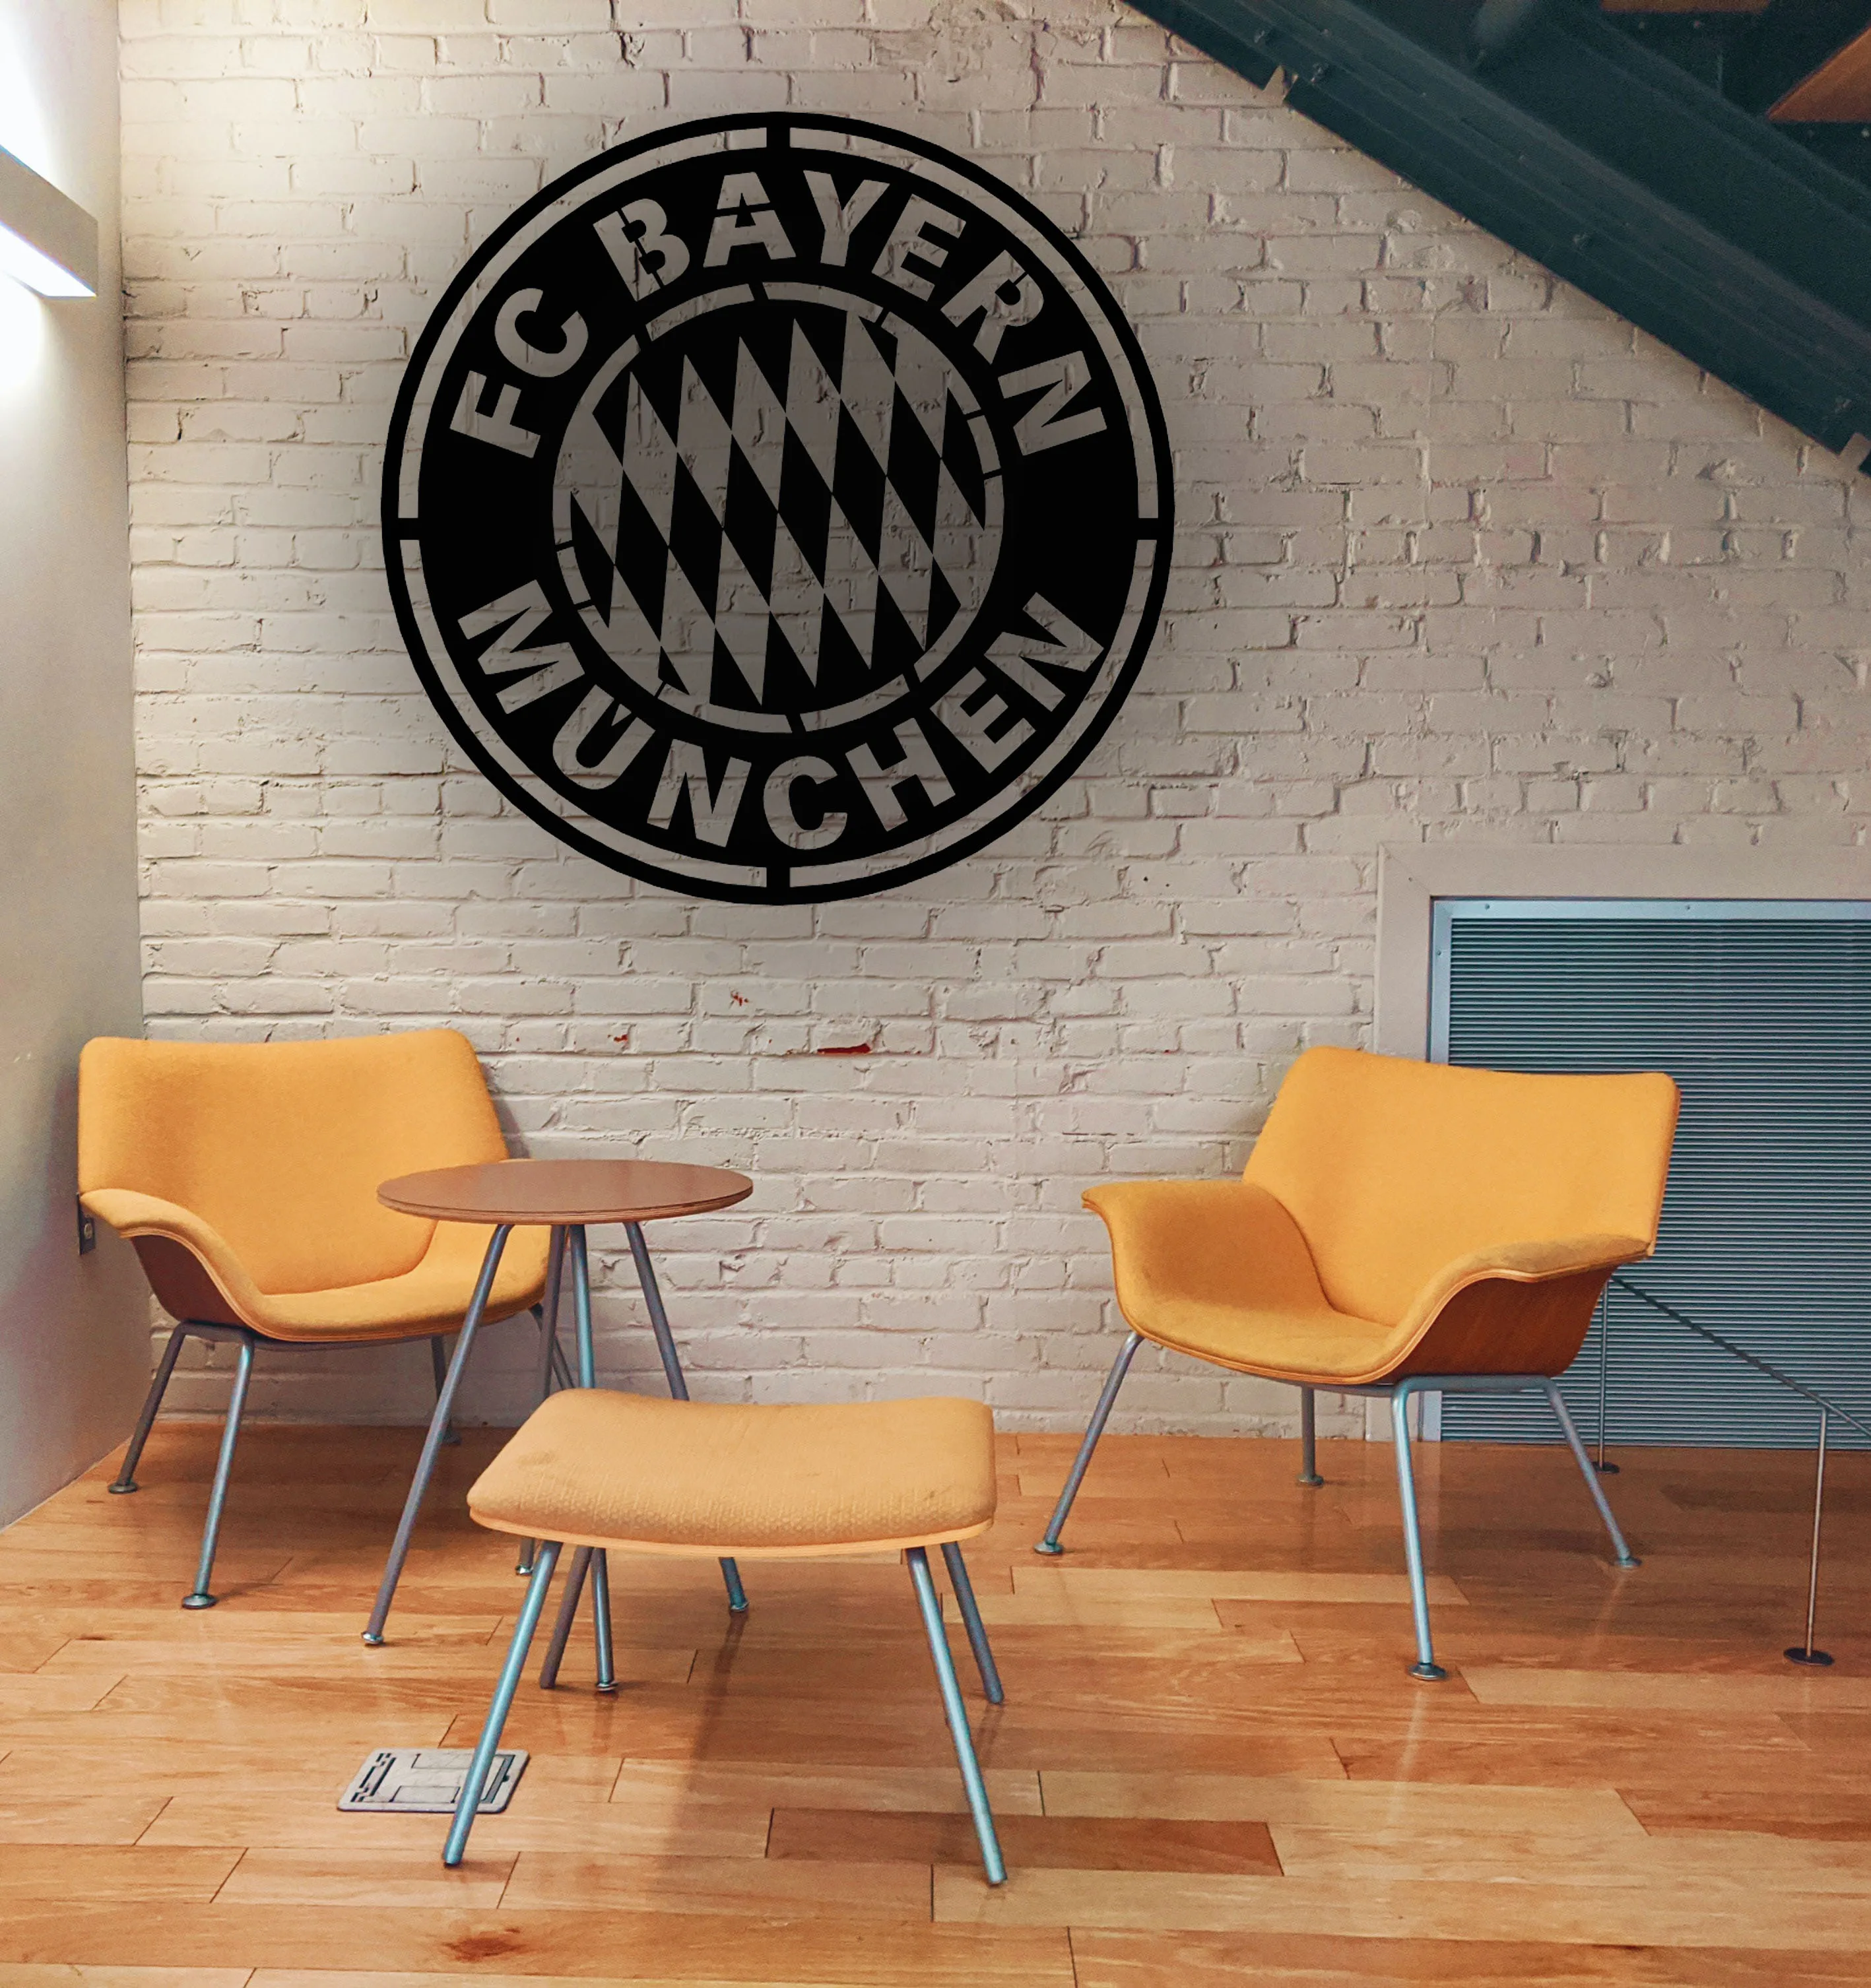 FC Bayern Munchen Logo Metal Wall Art Decor Picture Decoration Wall Decor  Table Hanging Football Team Fans Present Gift